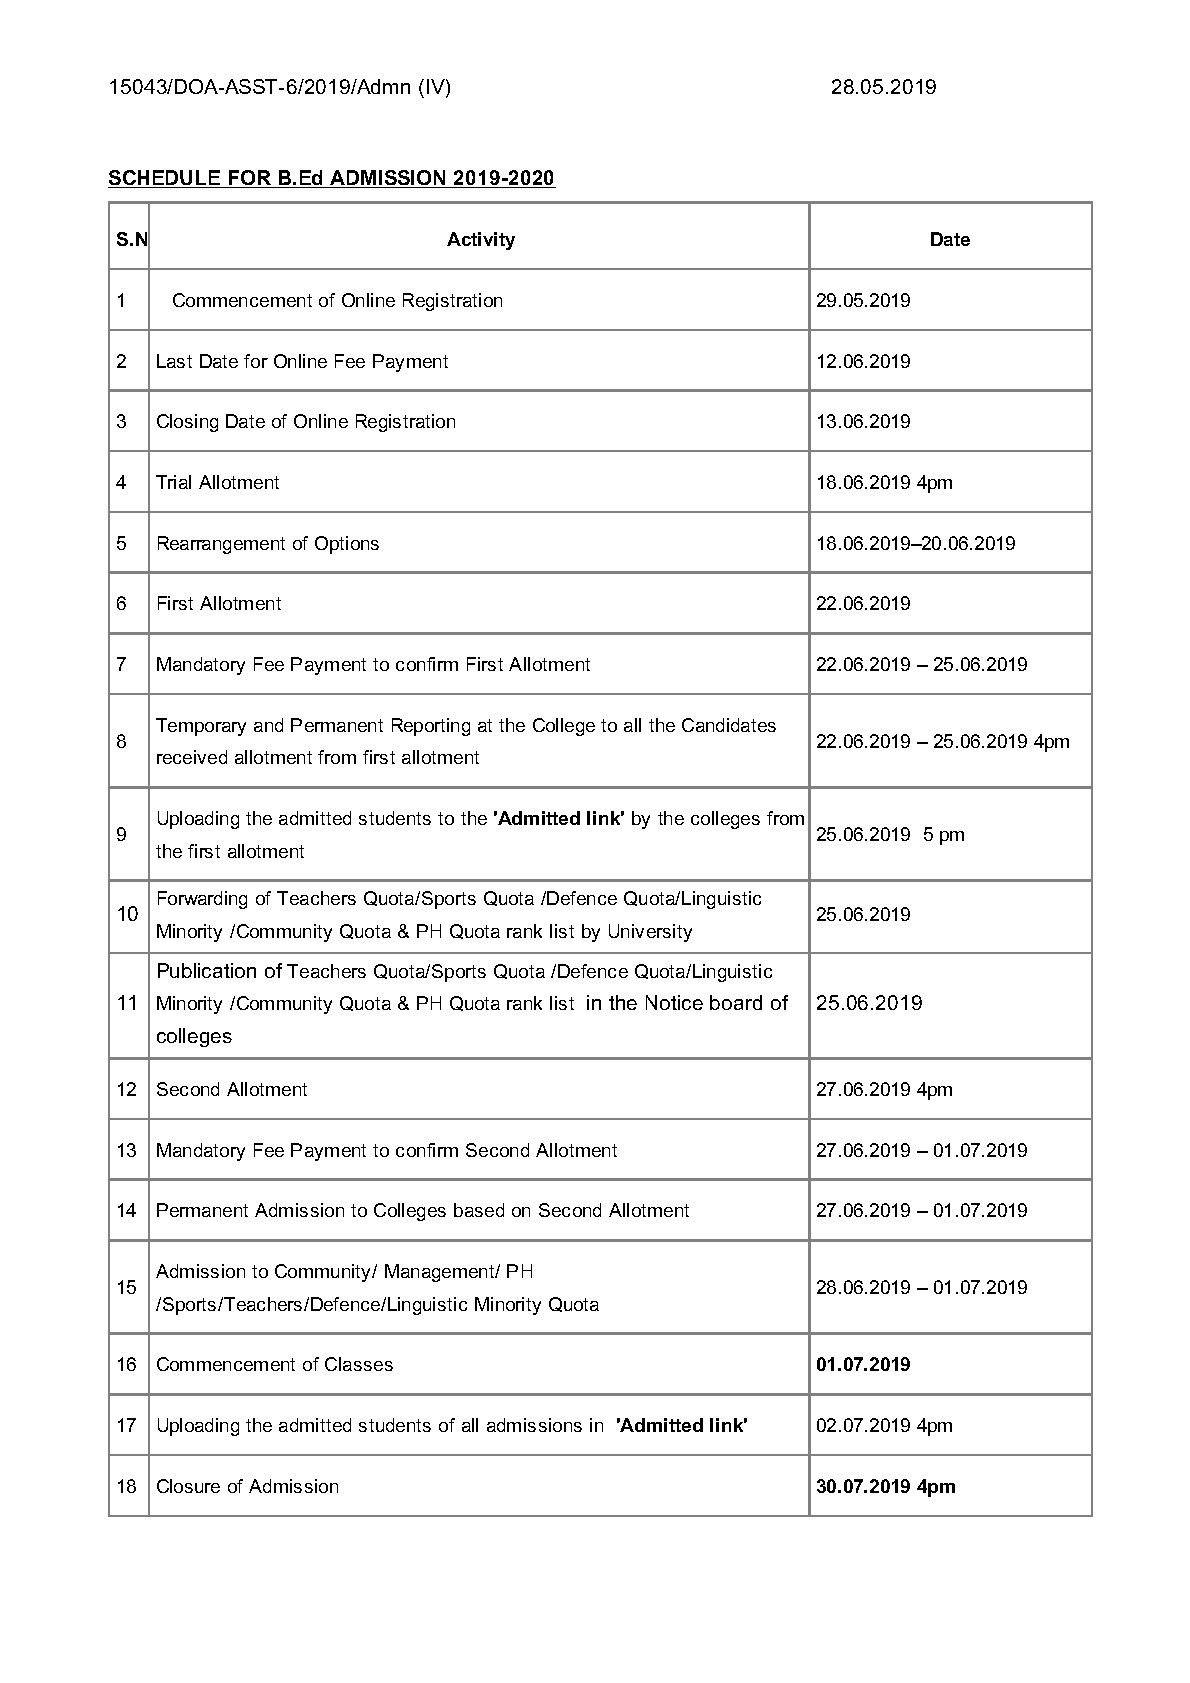 Schedule For B Ed Admission 2019 2020 - Notification Image 1